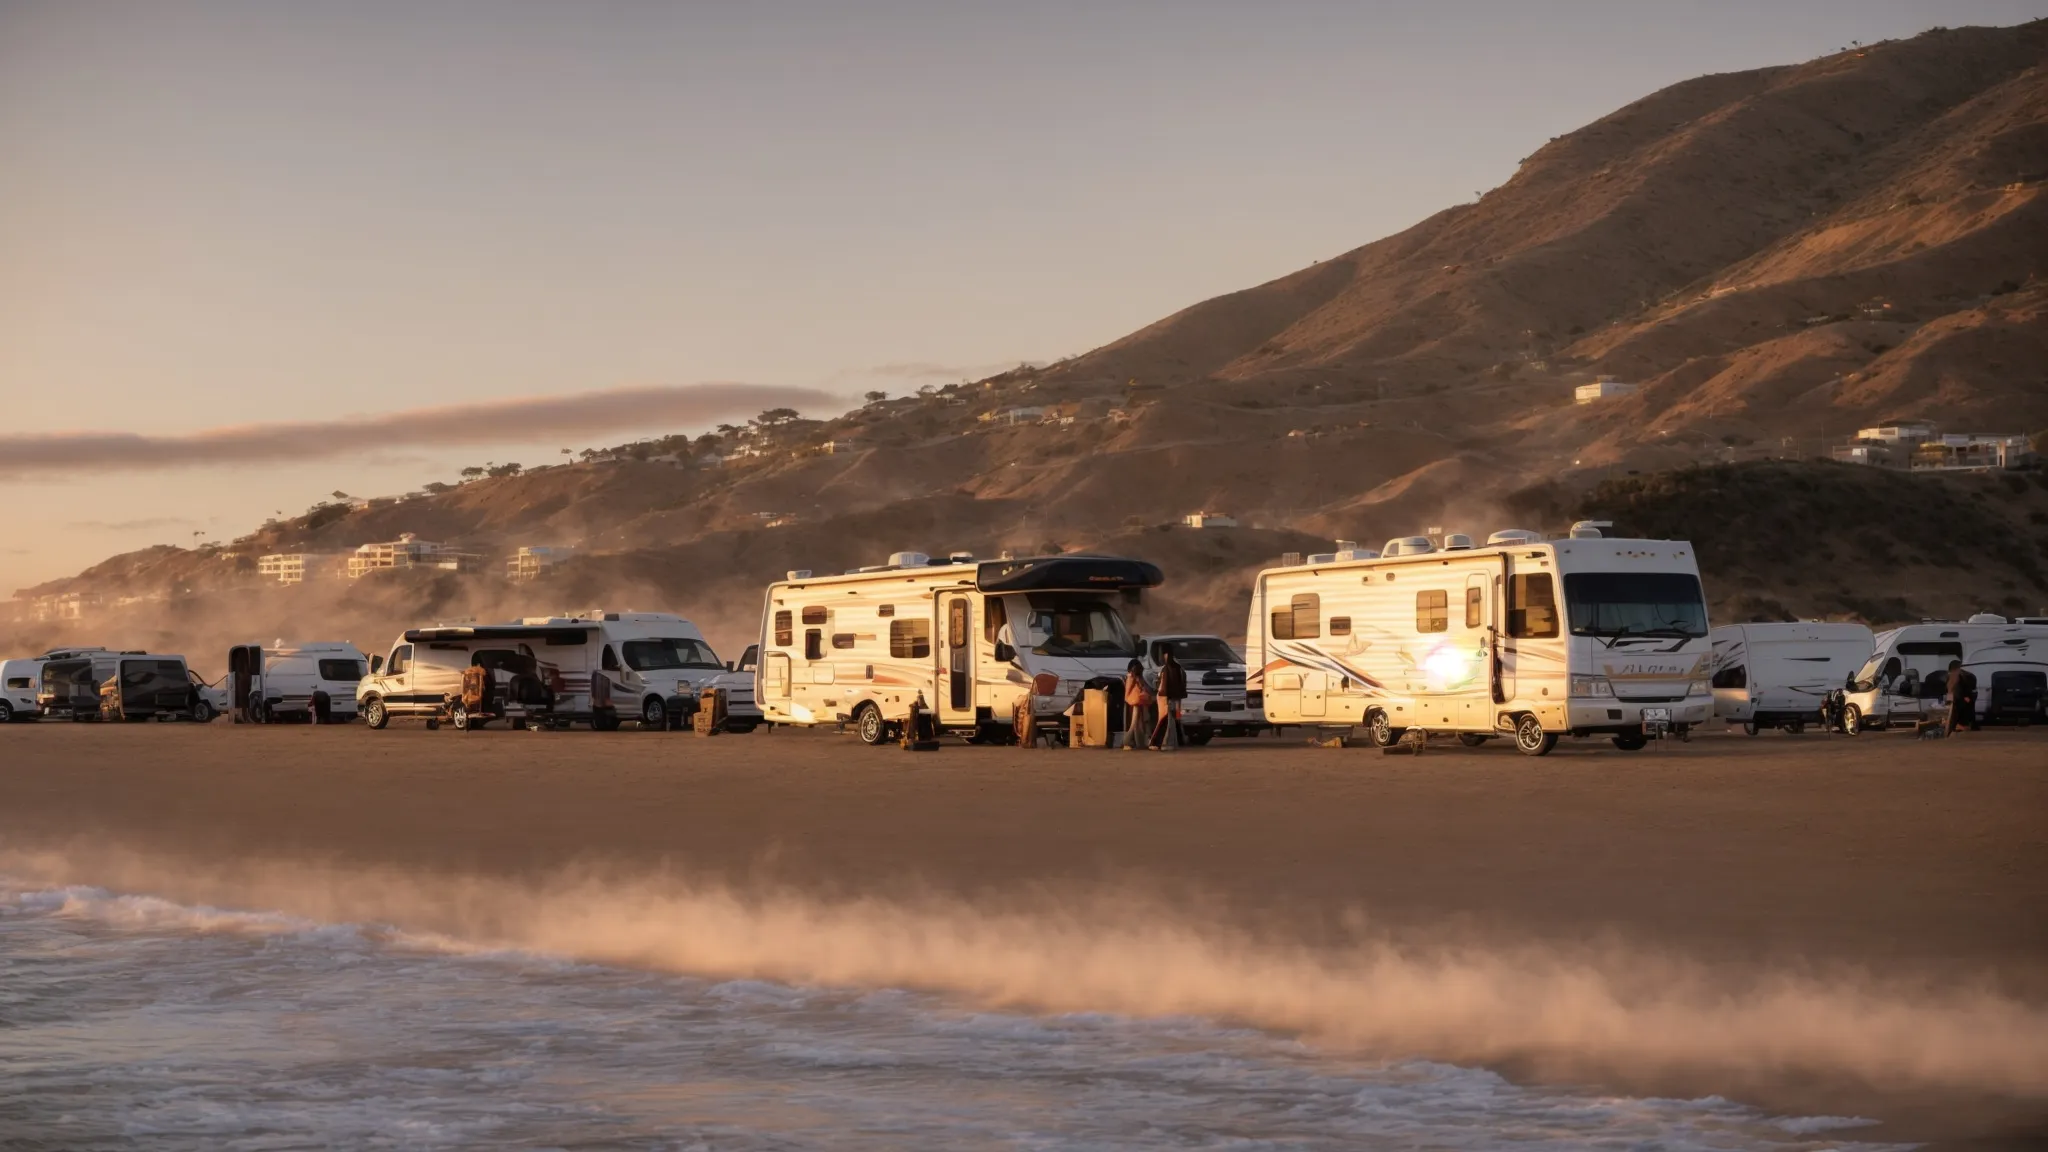 a row of diverse rvs parked against a scenic san diego sunset, with potential renters browsing them.